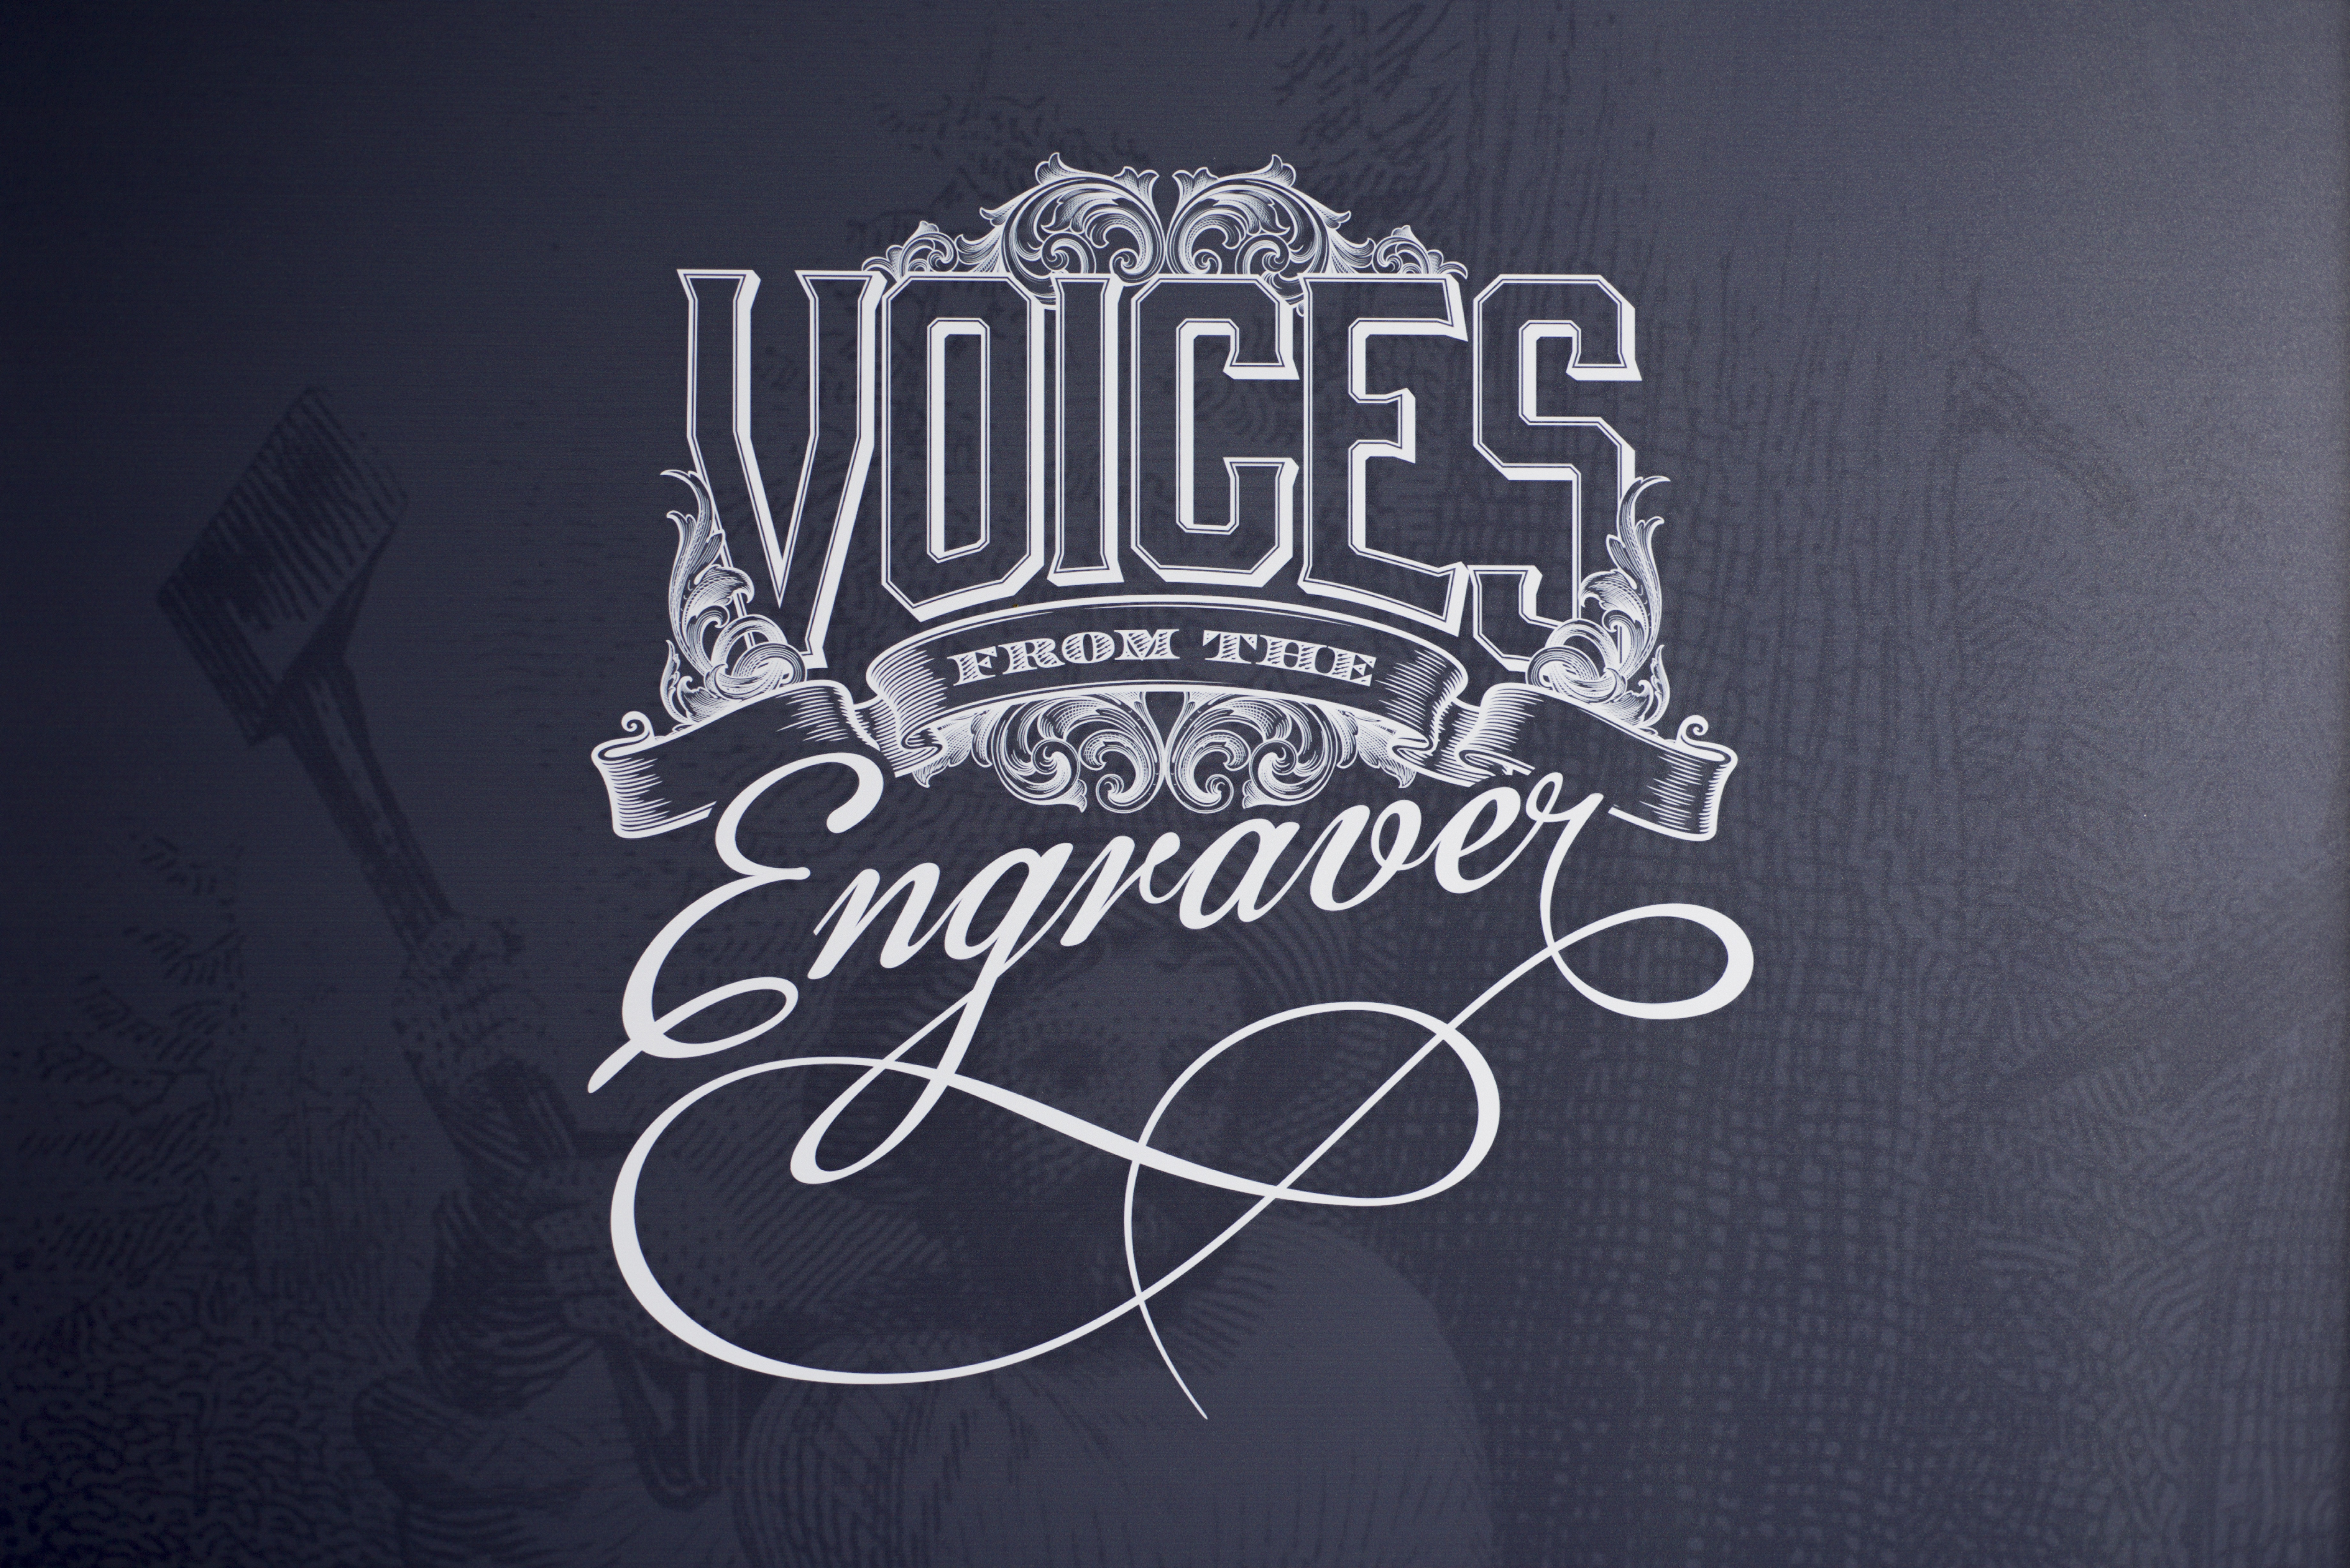 Voices from the Engraver